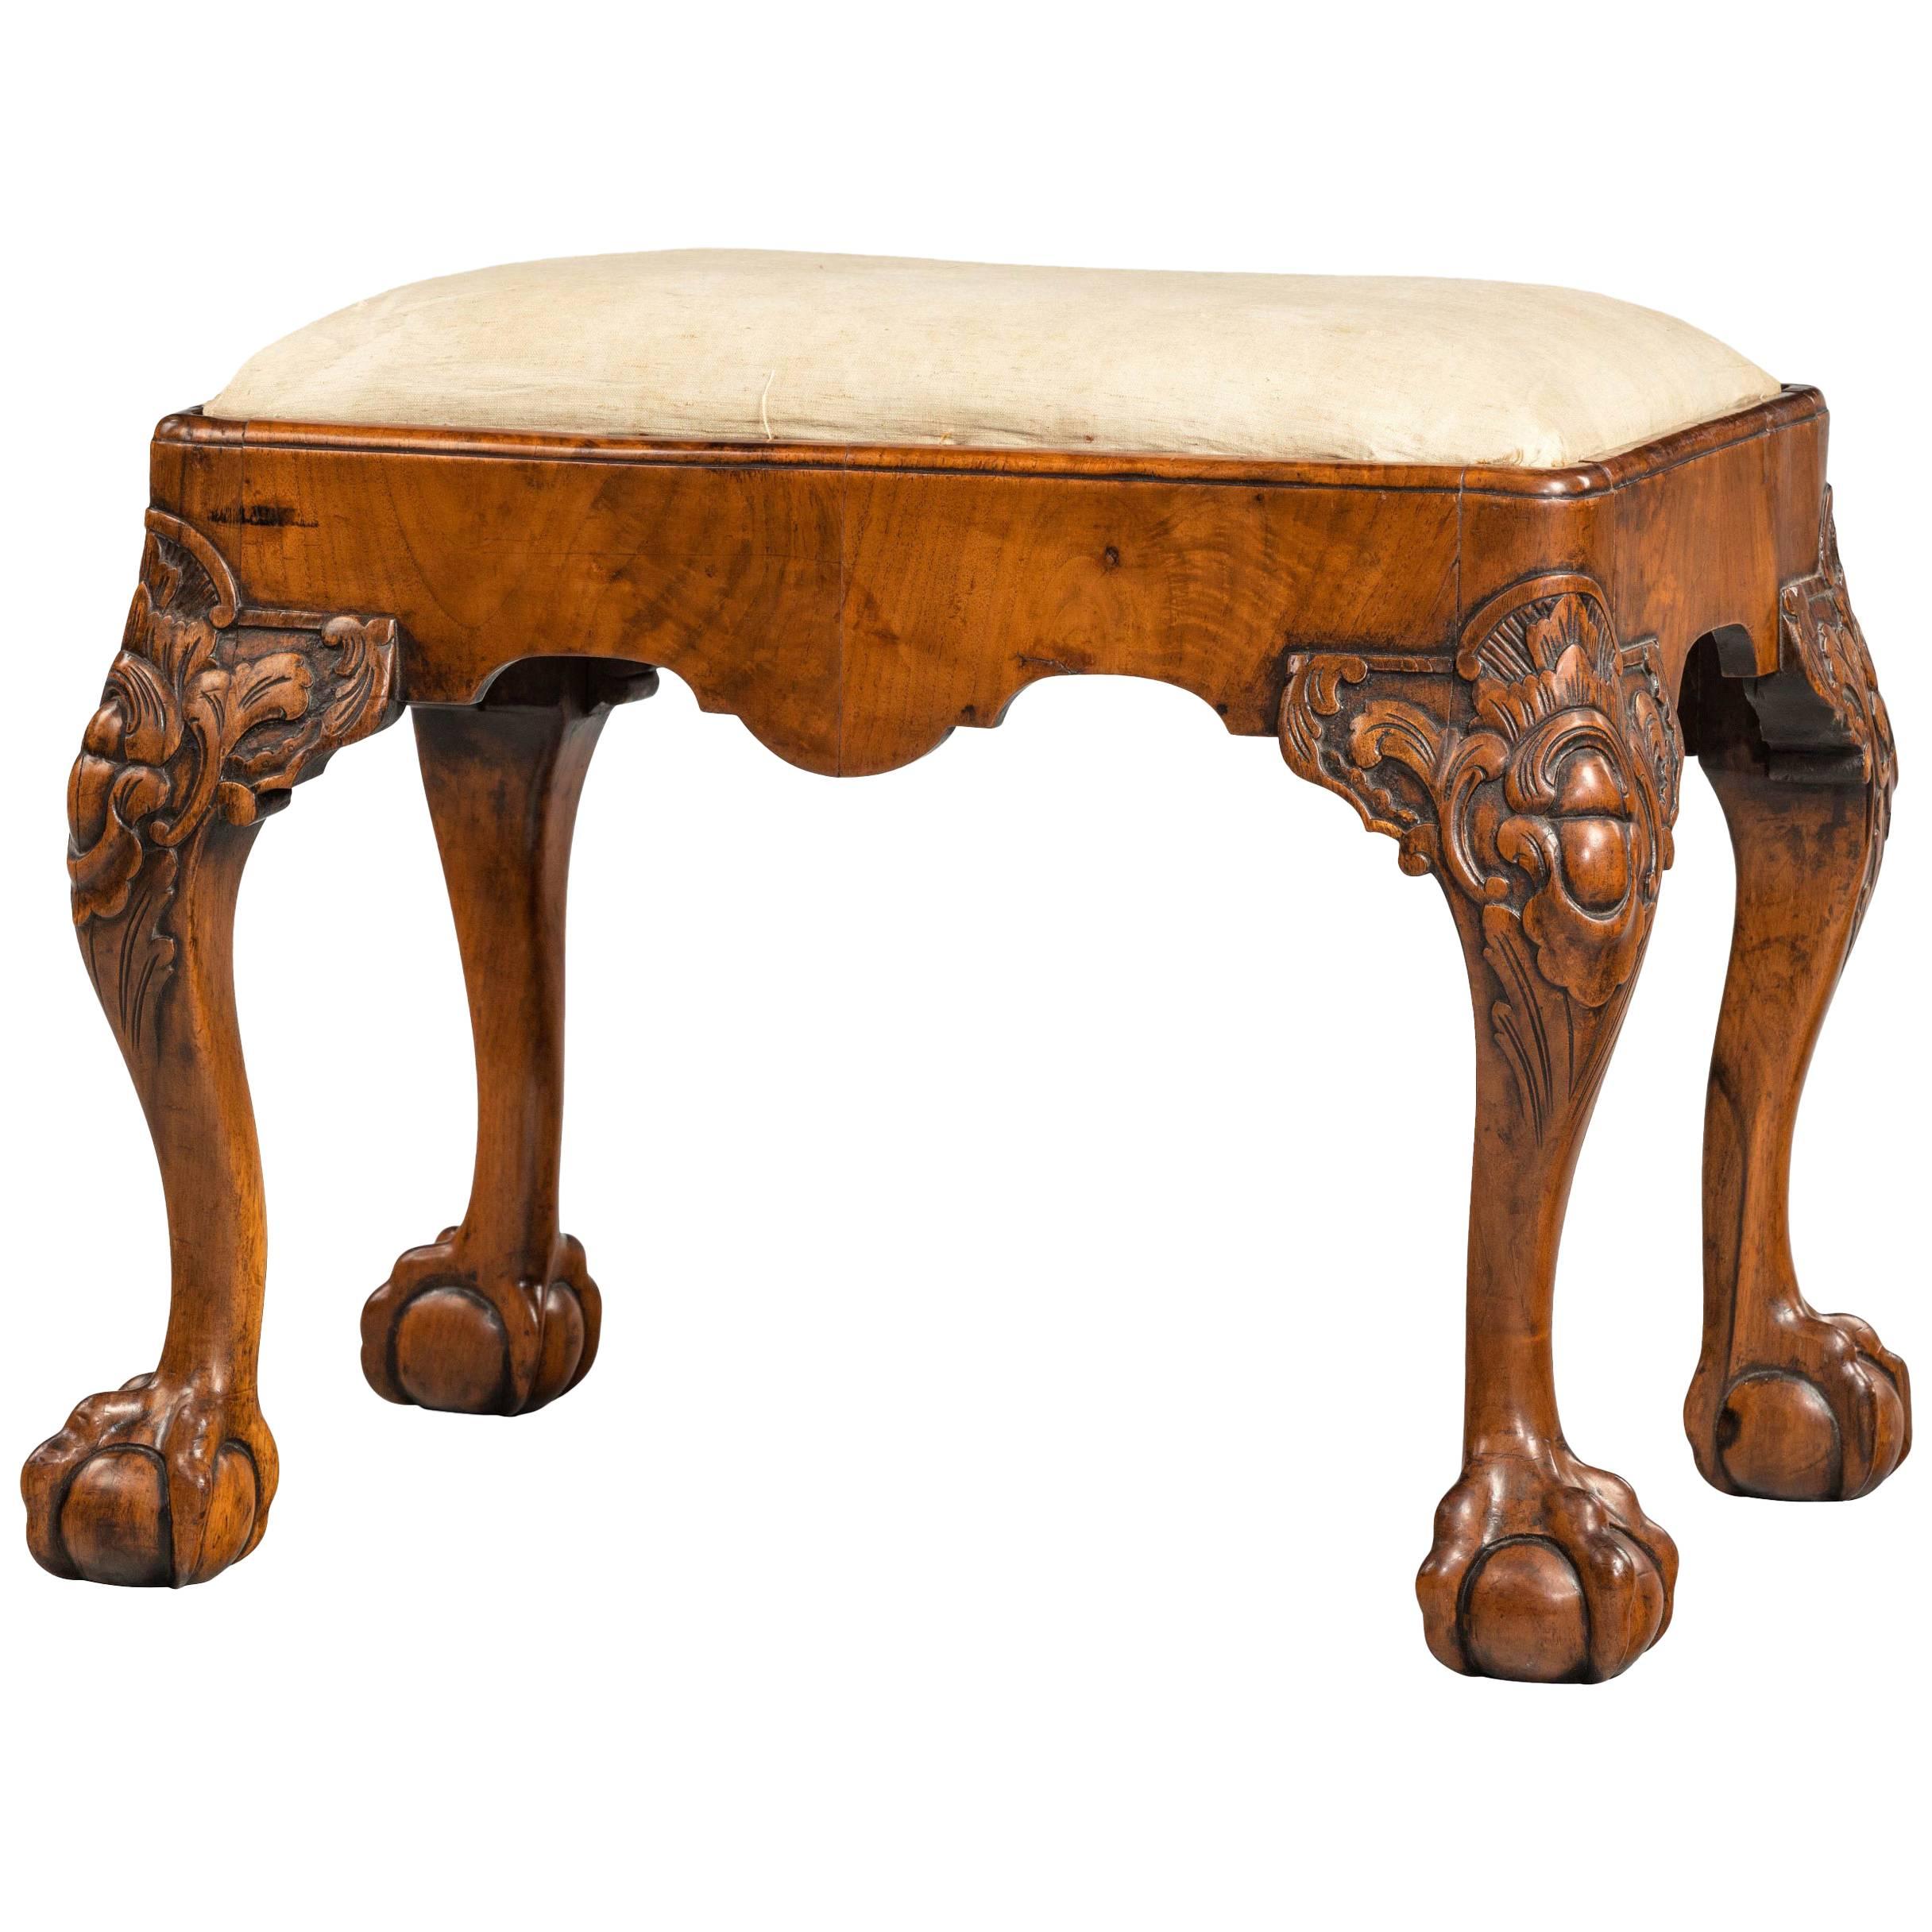 Finely Carved Mid-18th Century Walnut Stool